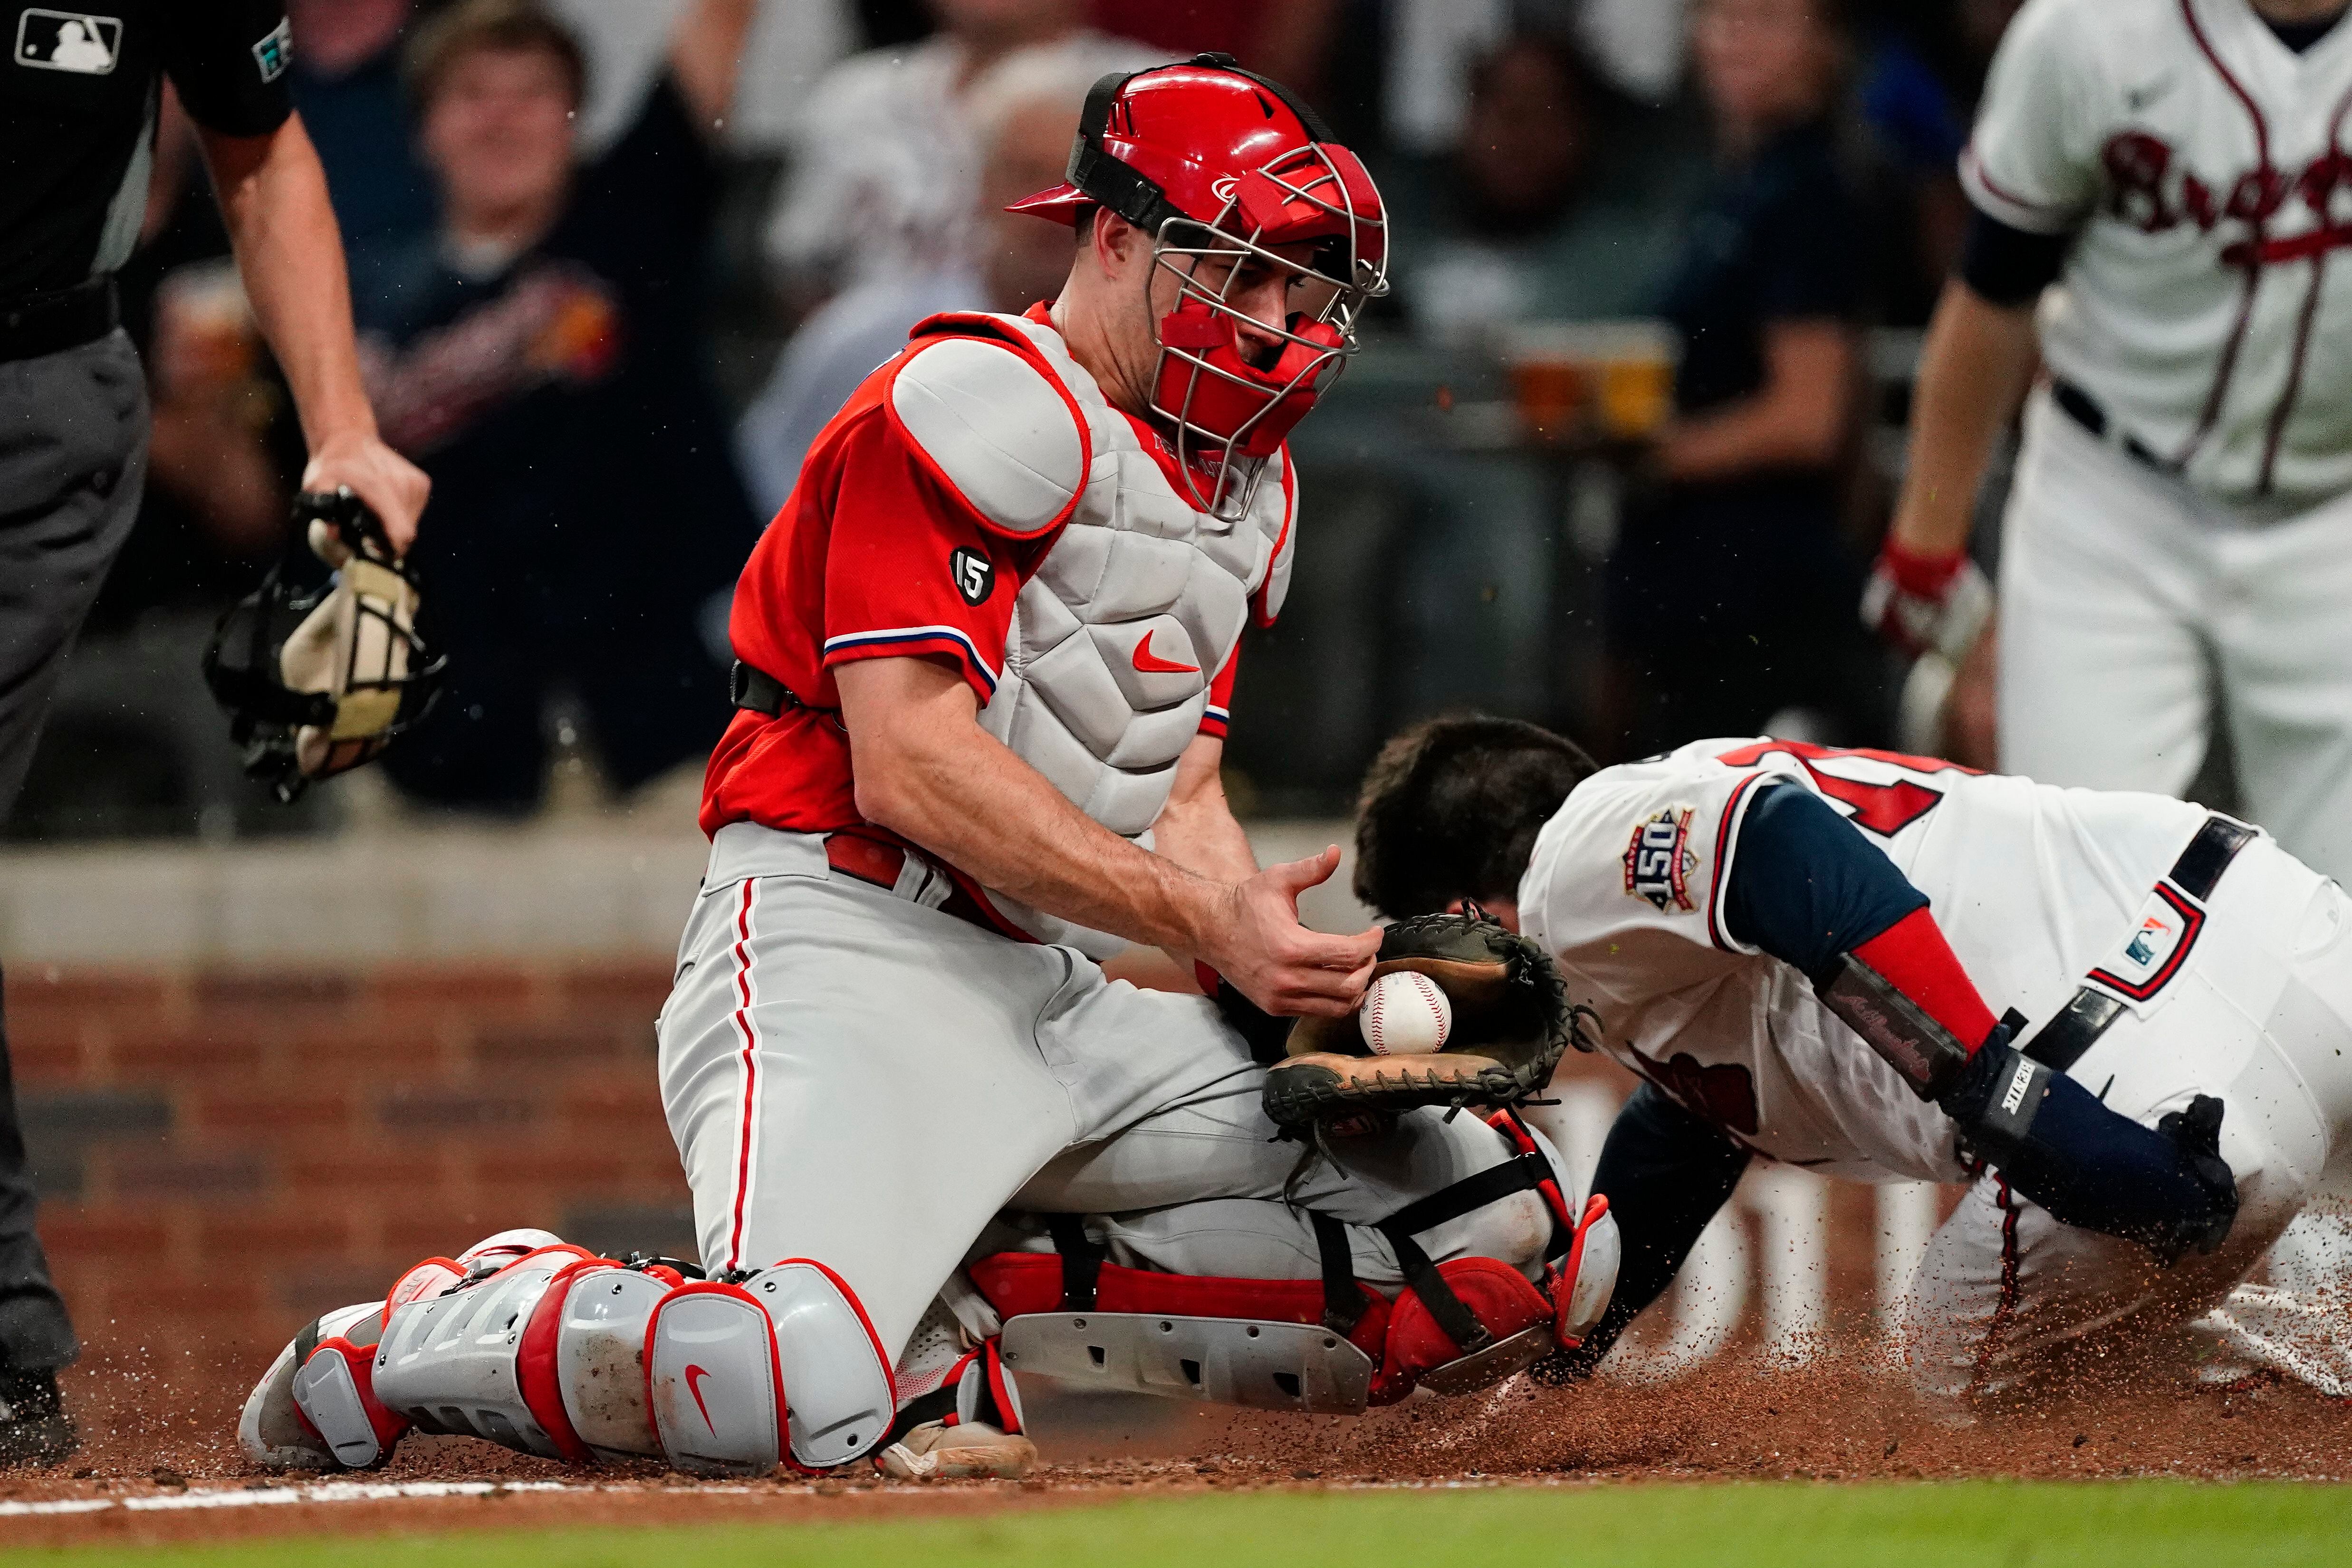 Braves fumbled Dansby Swanson contract Freddie Freeman-style